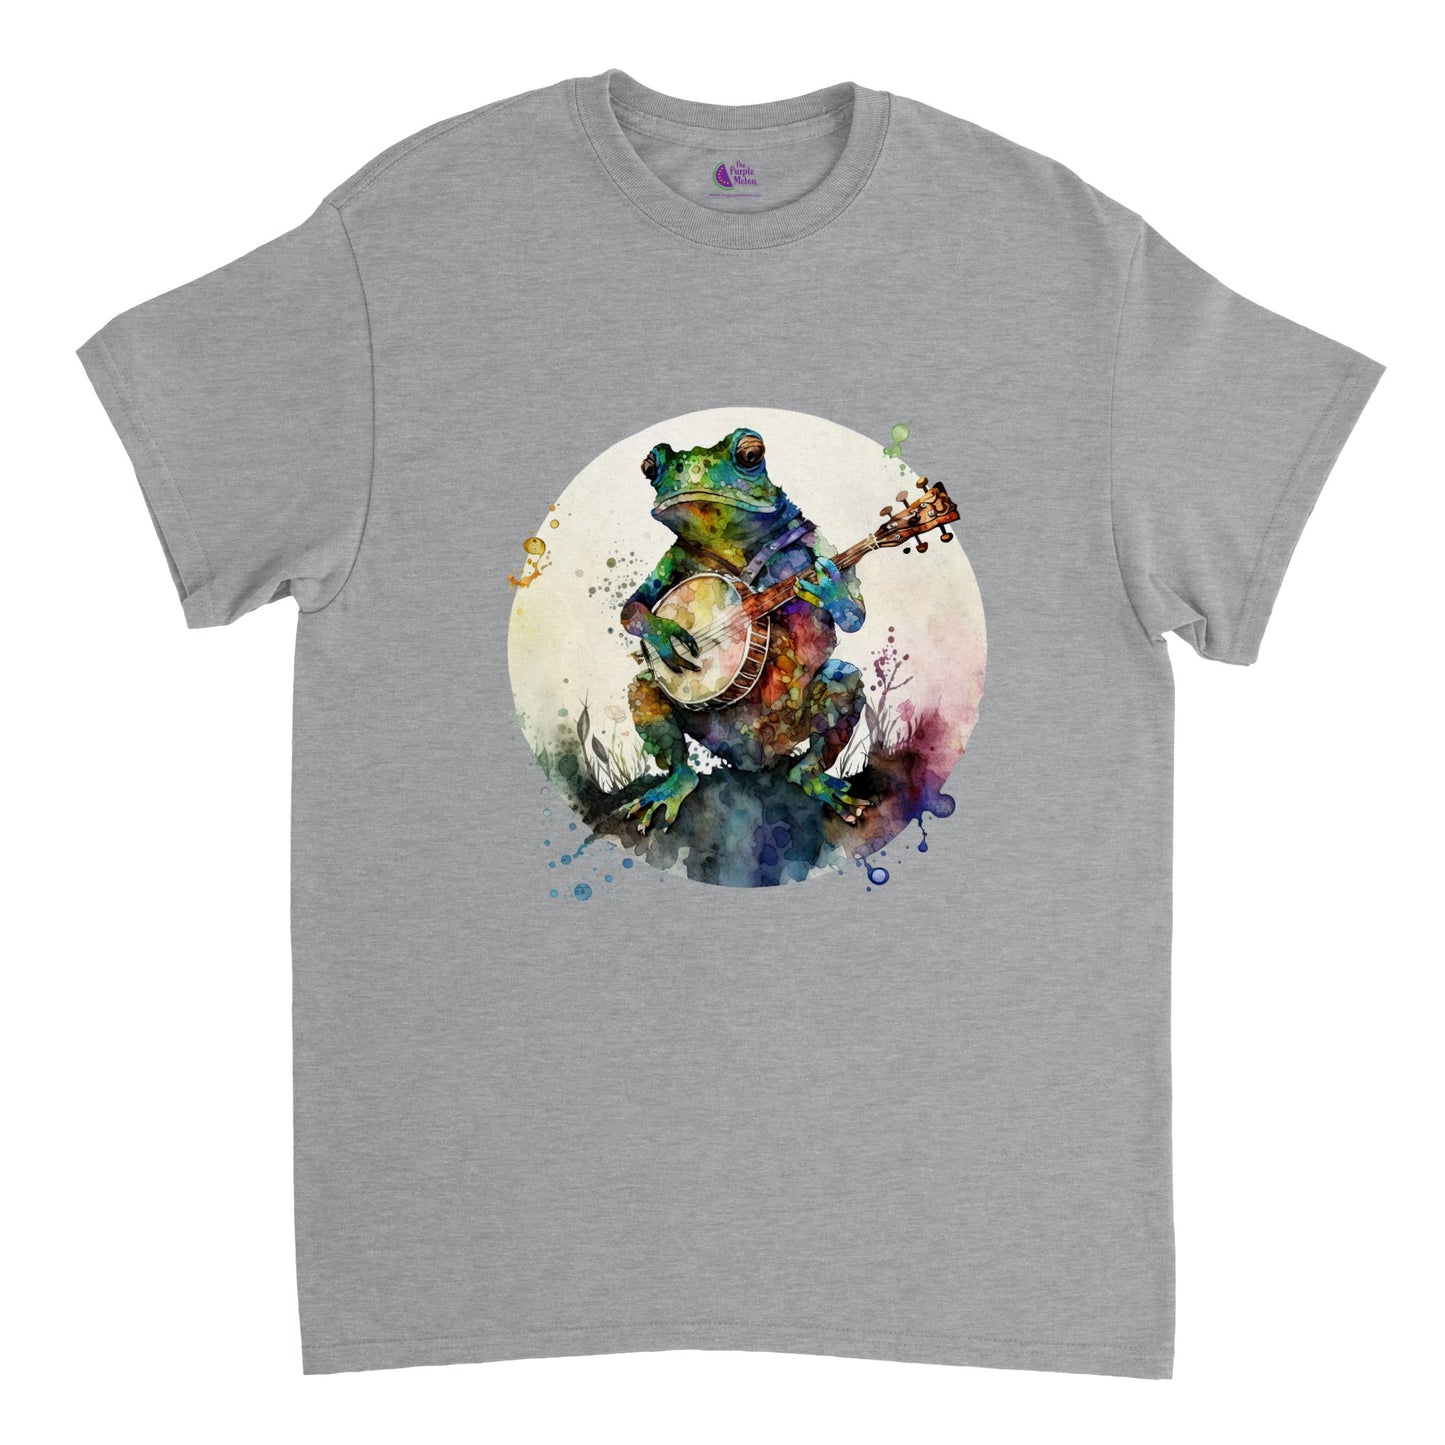 grey t-shirt with a frog playing a banjo print